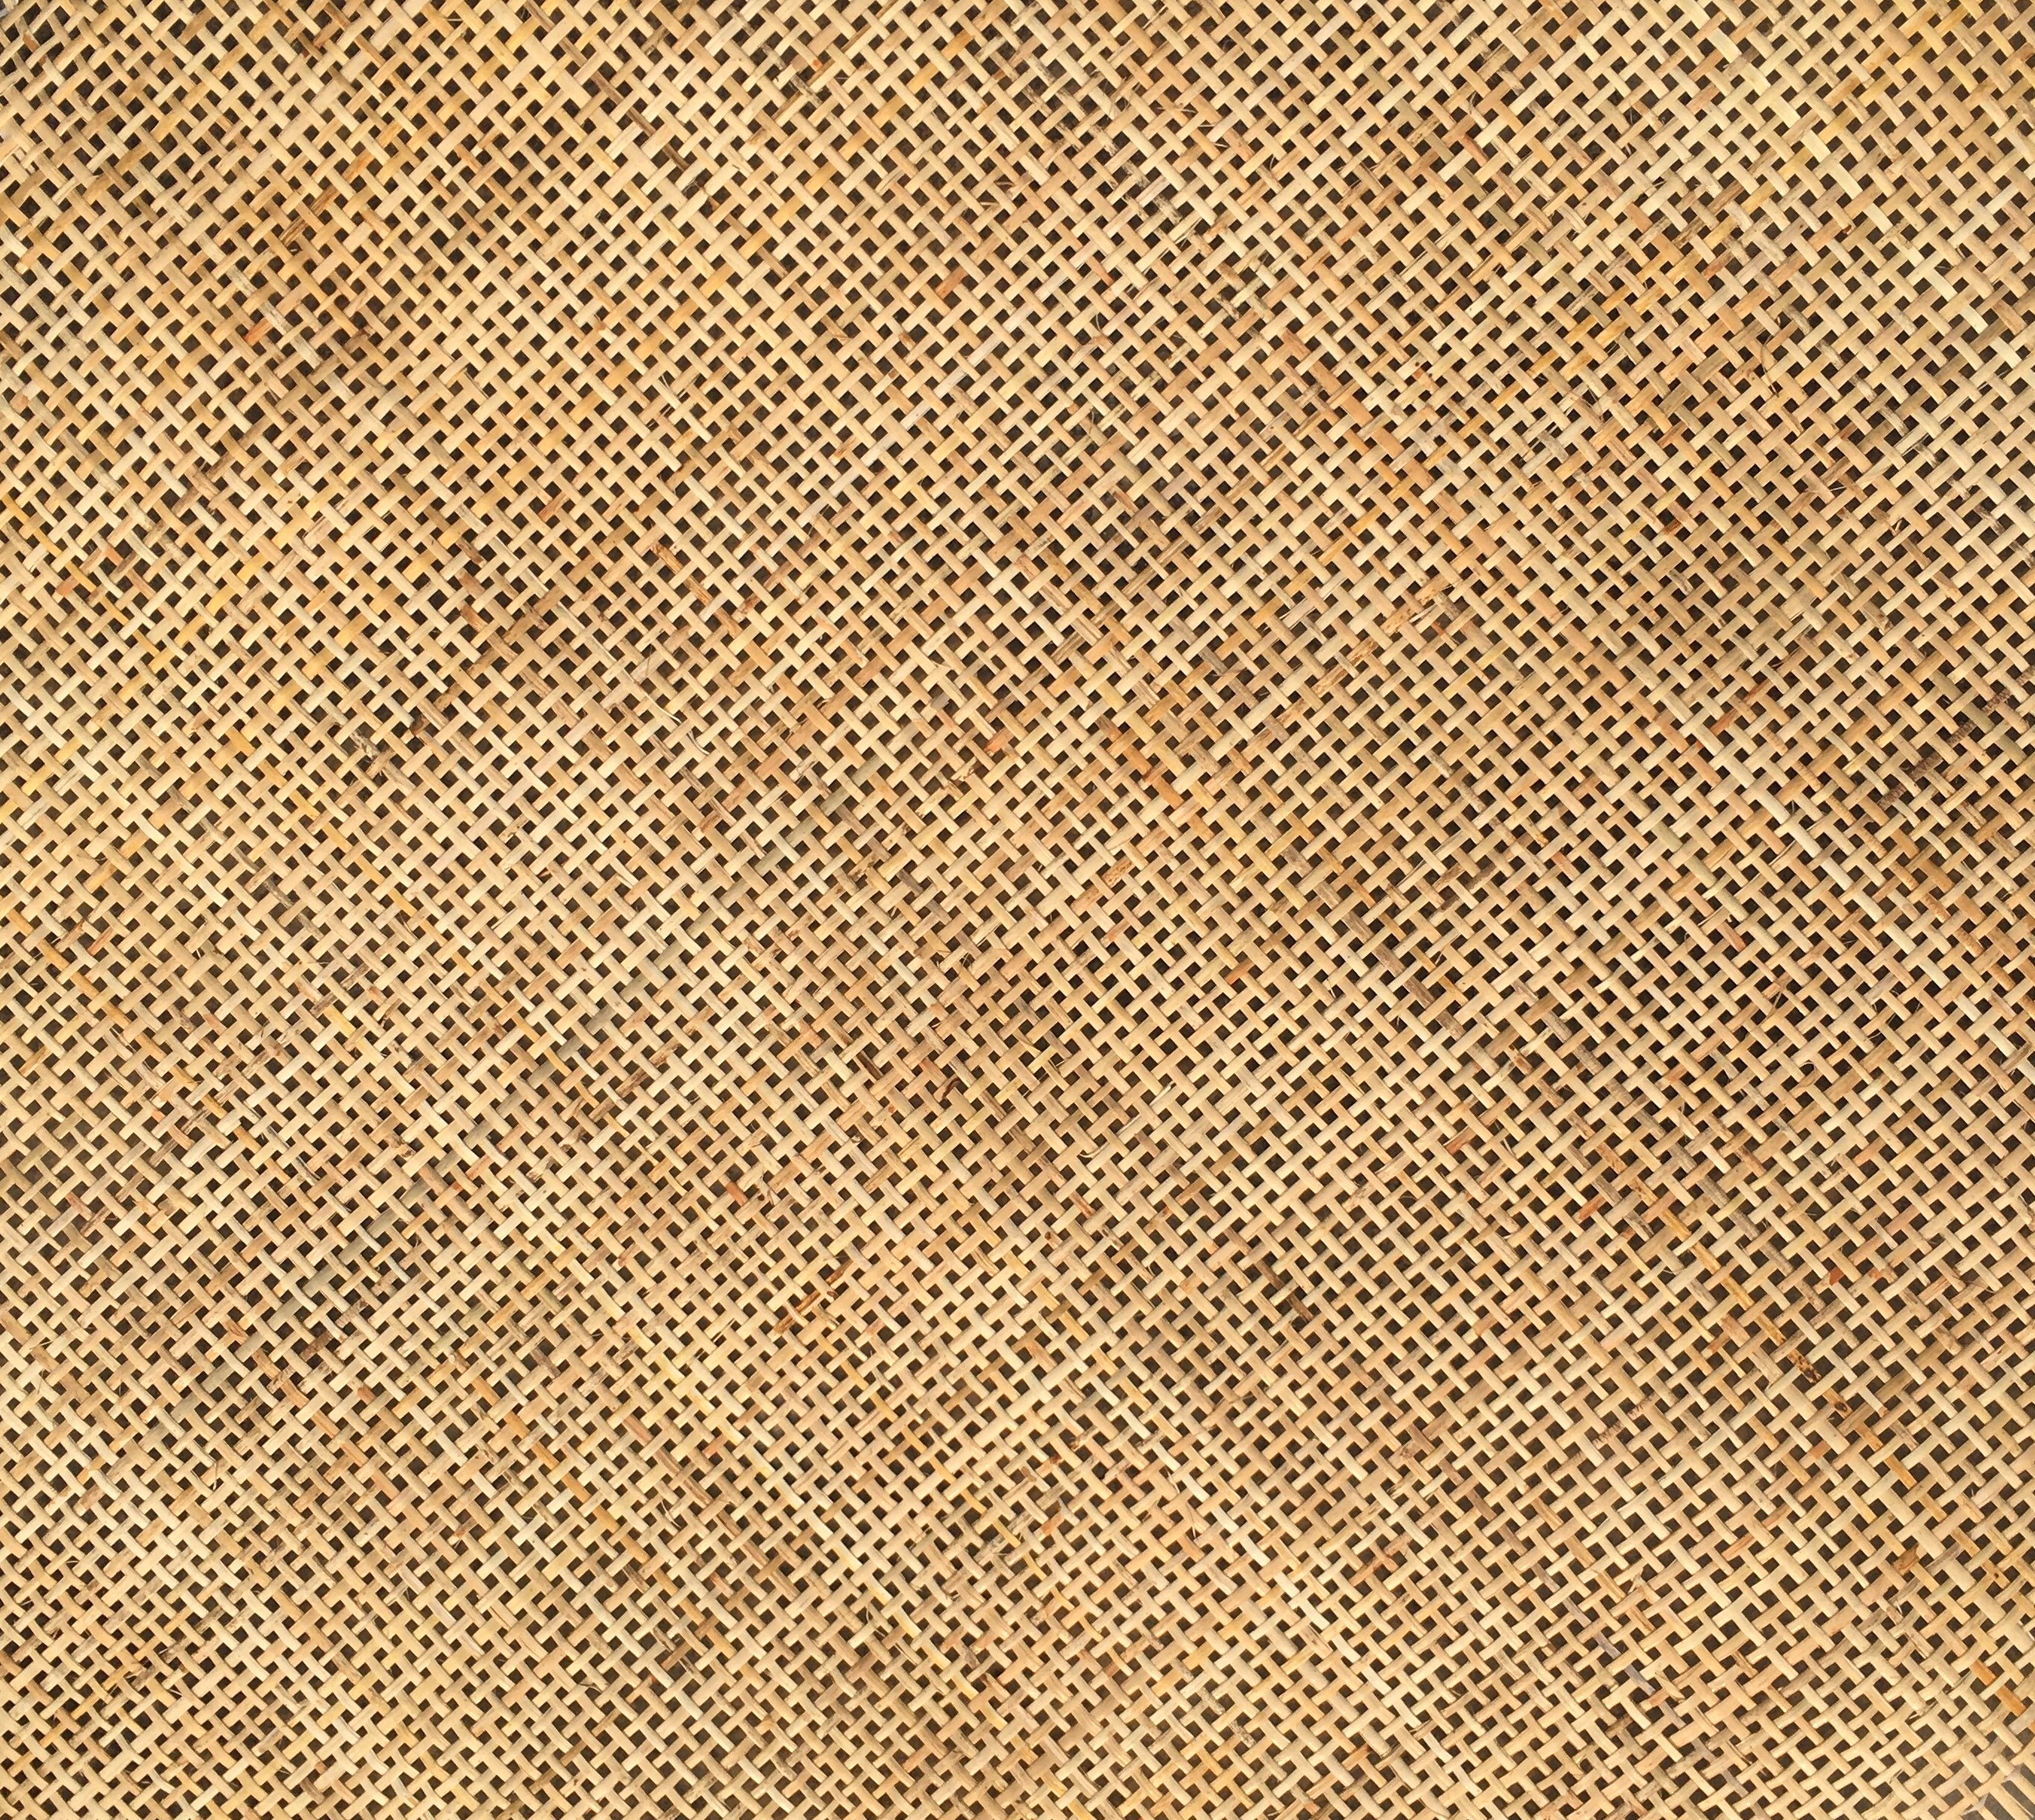 UNBLEACHED Natural Rattan Cane Webbing,pre-woven,18 Wide,open 1/2